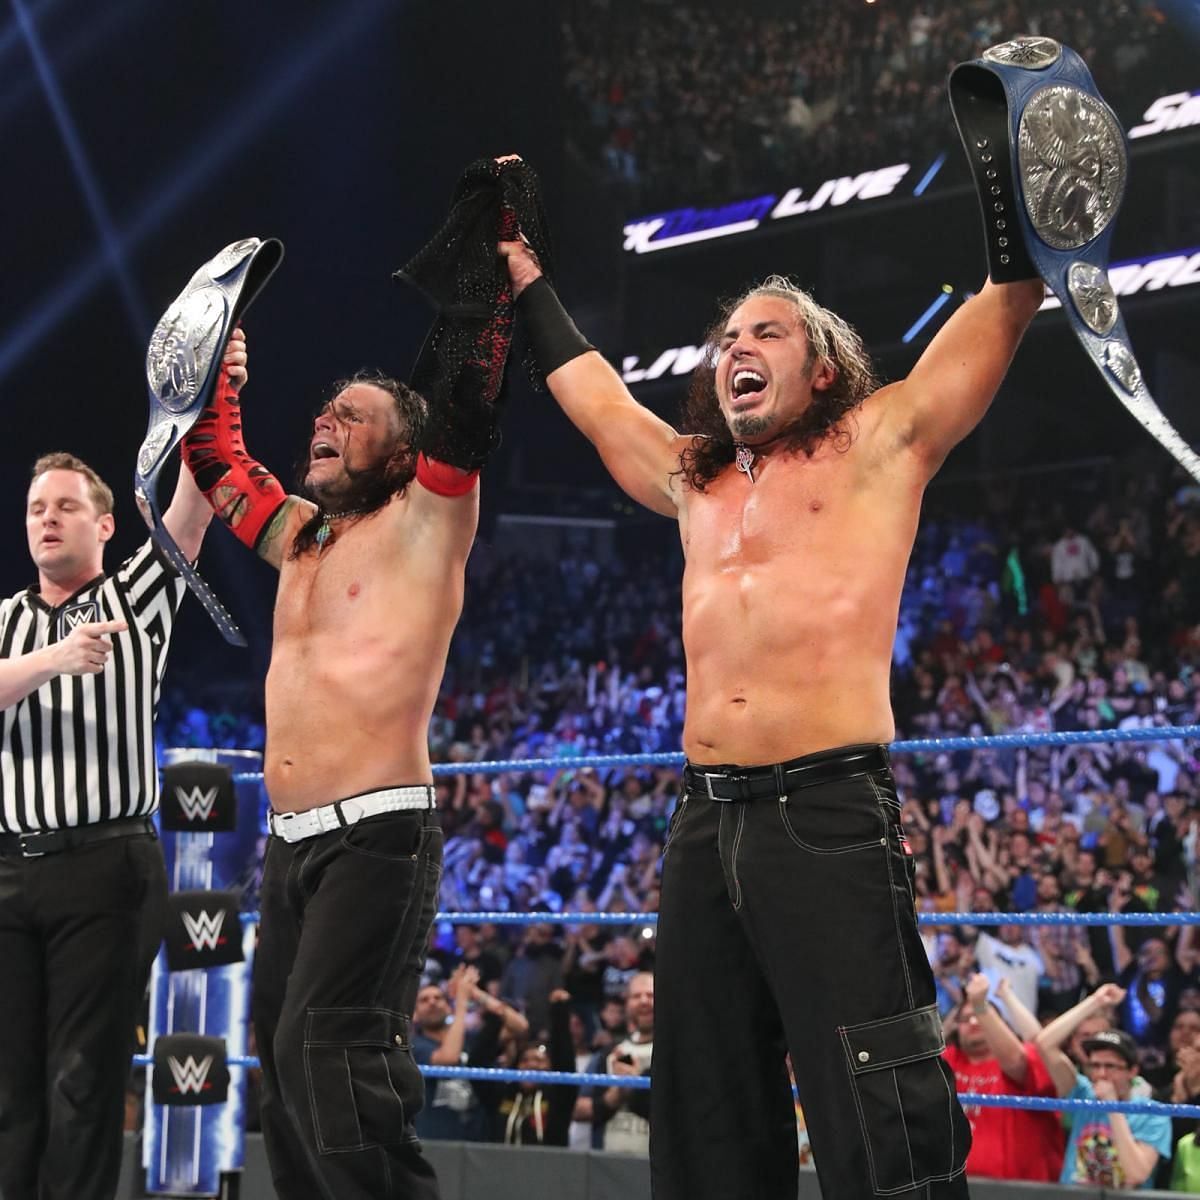 The Hardy Boyz won the SmackDown Tag Team Championships in April 2019.